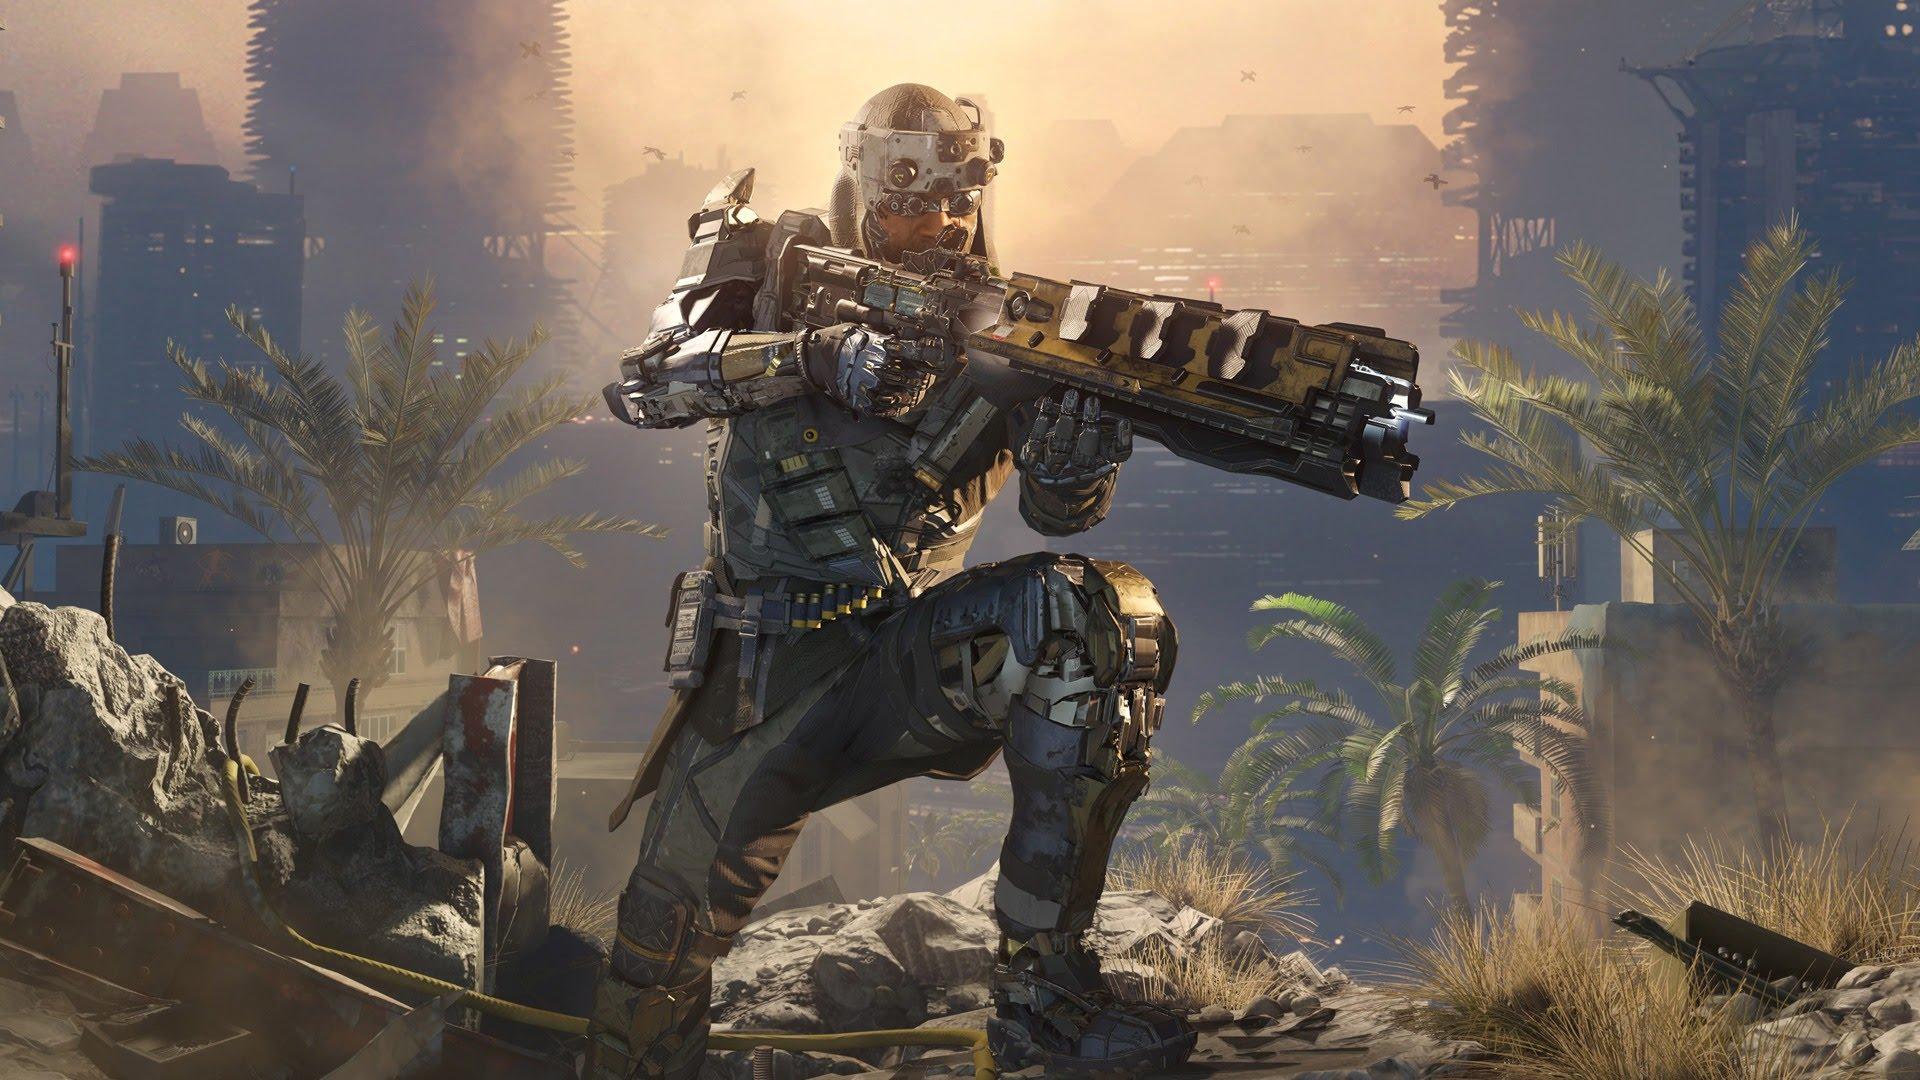 Call-of-Duty-Blackout-Sniper-tips-tricks-and-strategy-advice